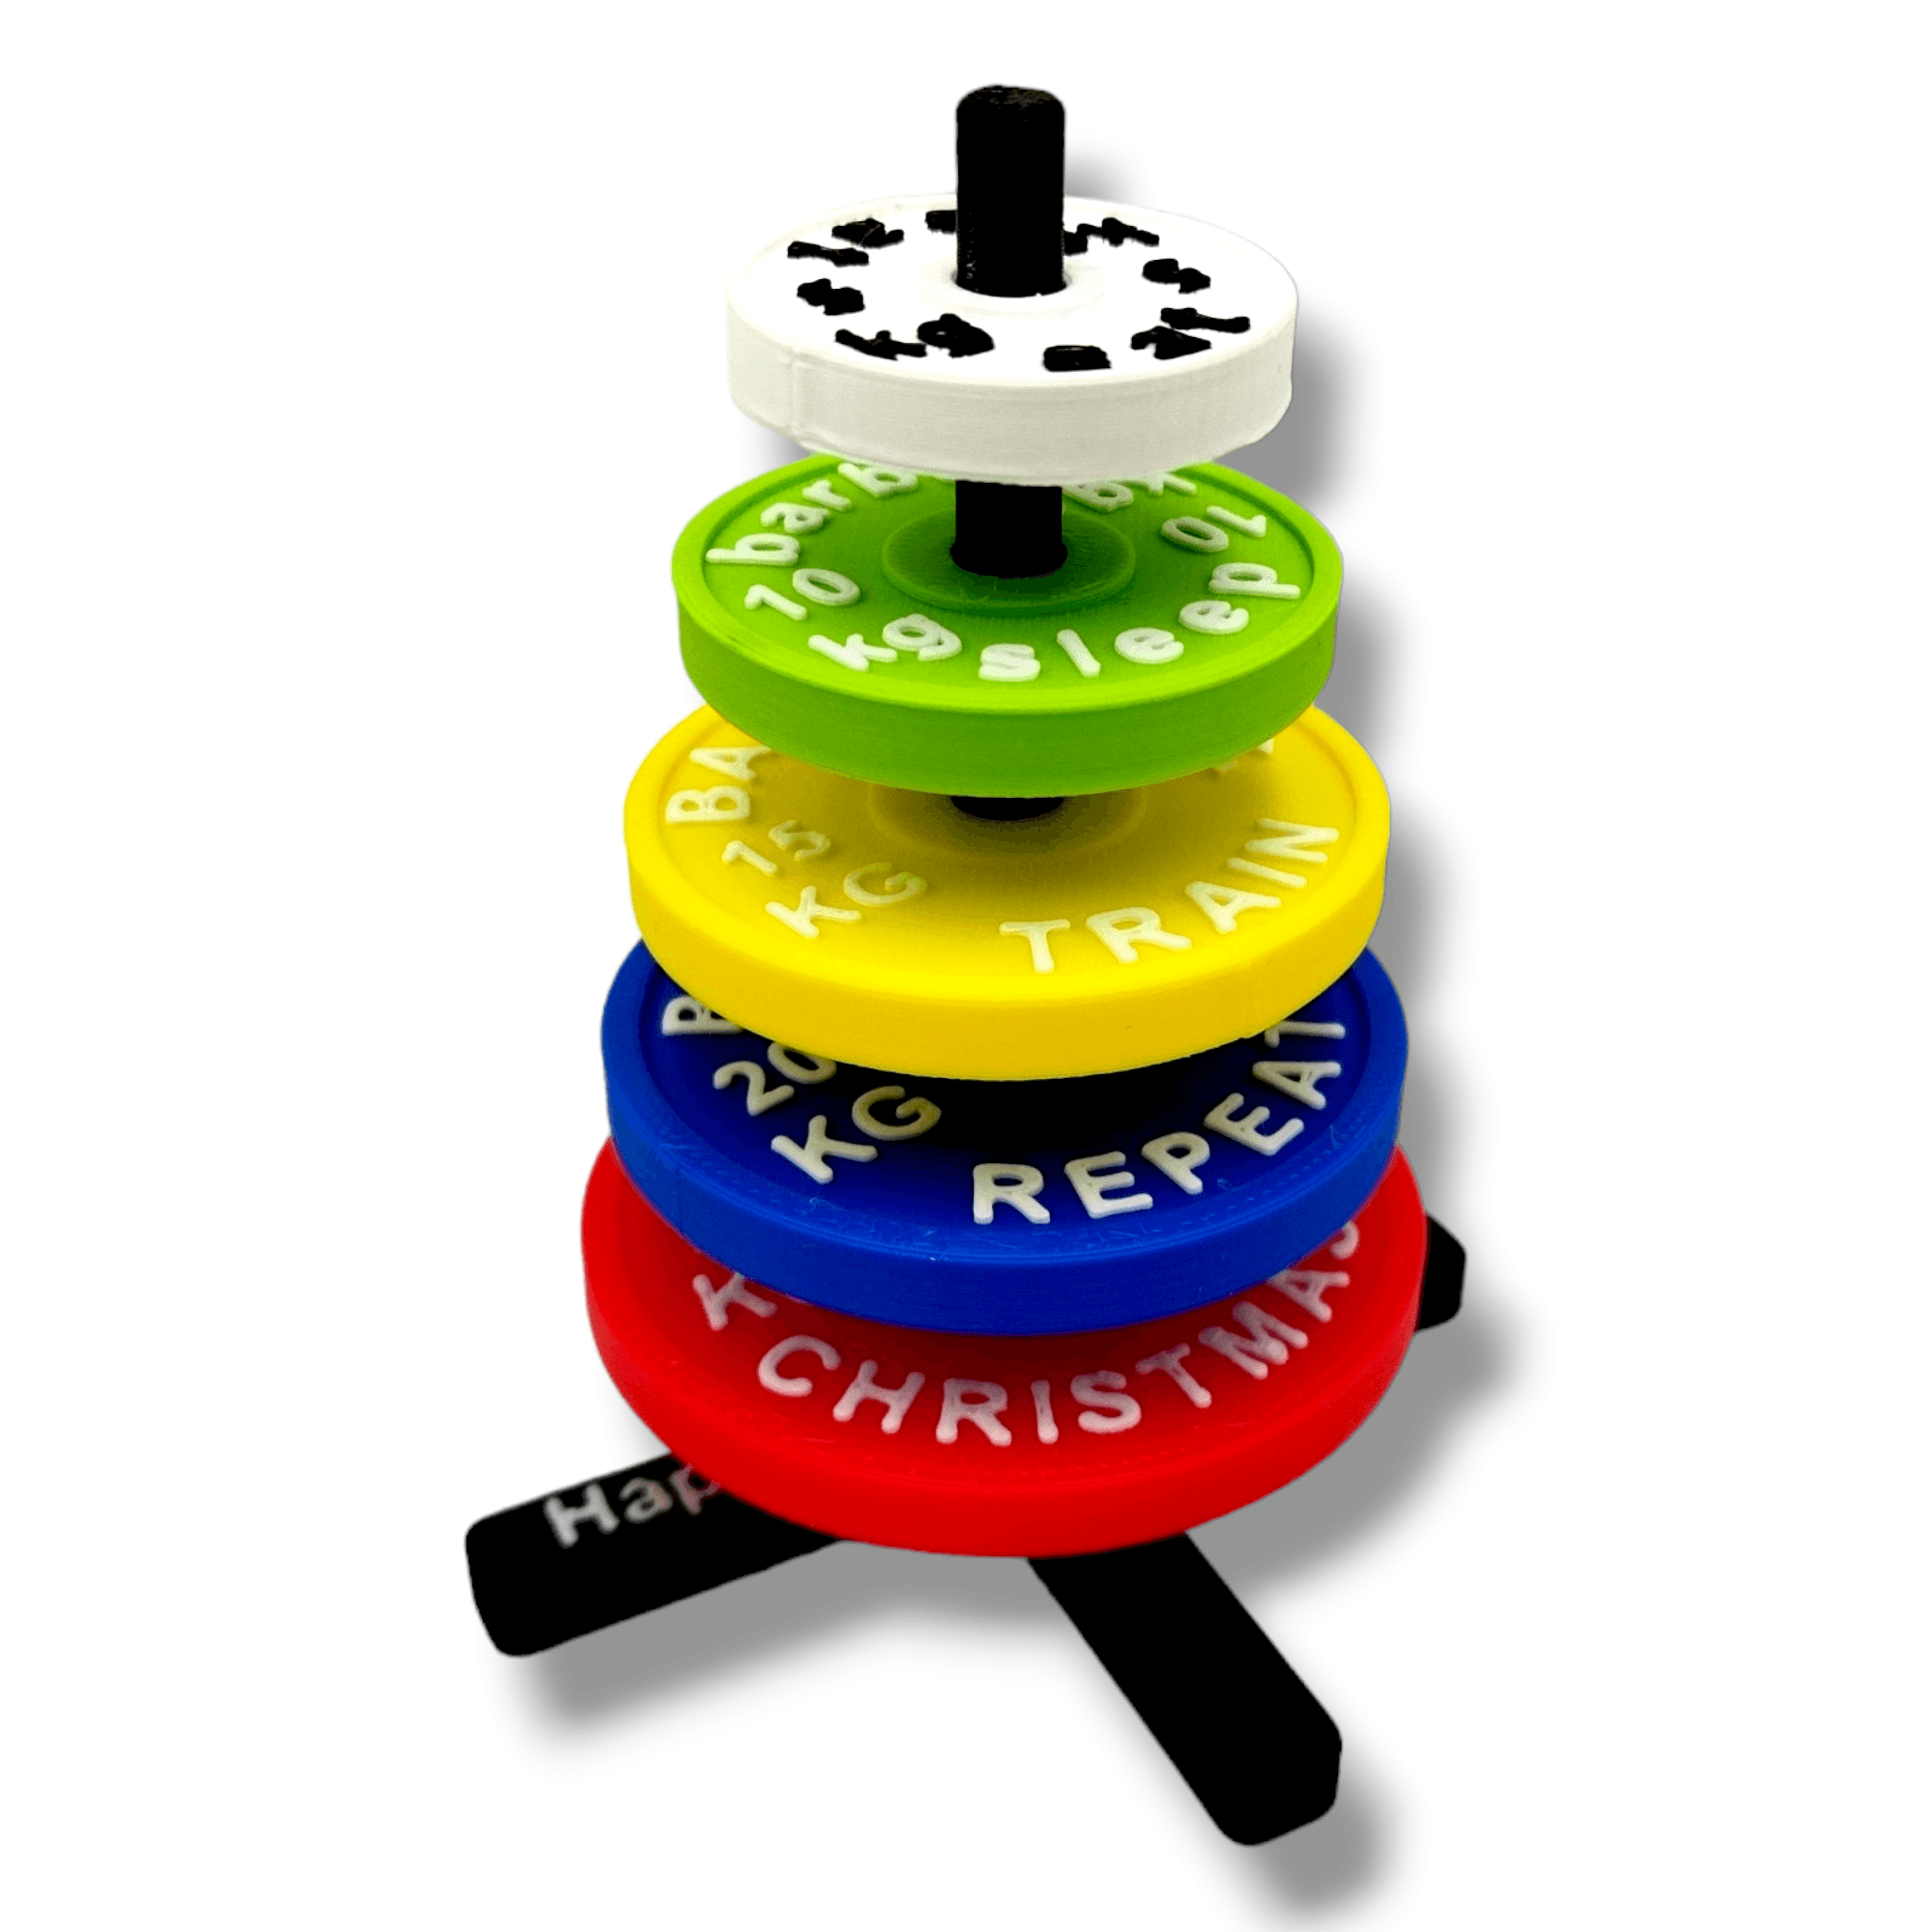 GYM CHRISTMAS TREE - WEIGHT RACK with PLATES 3d model